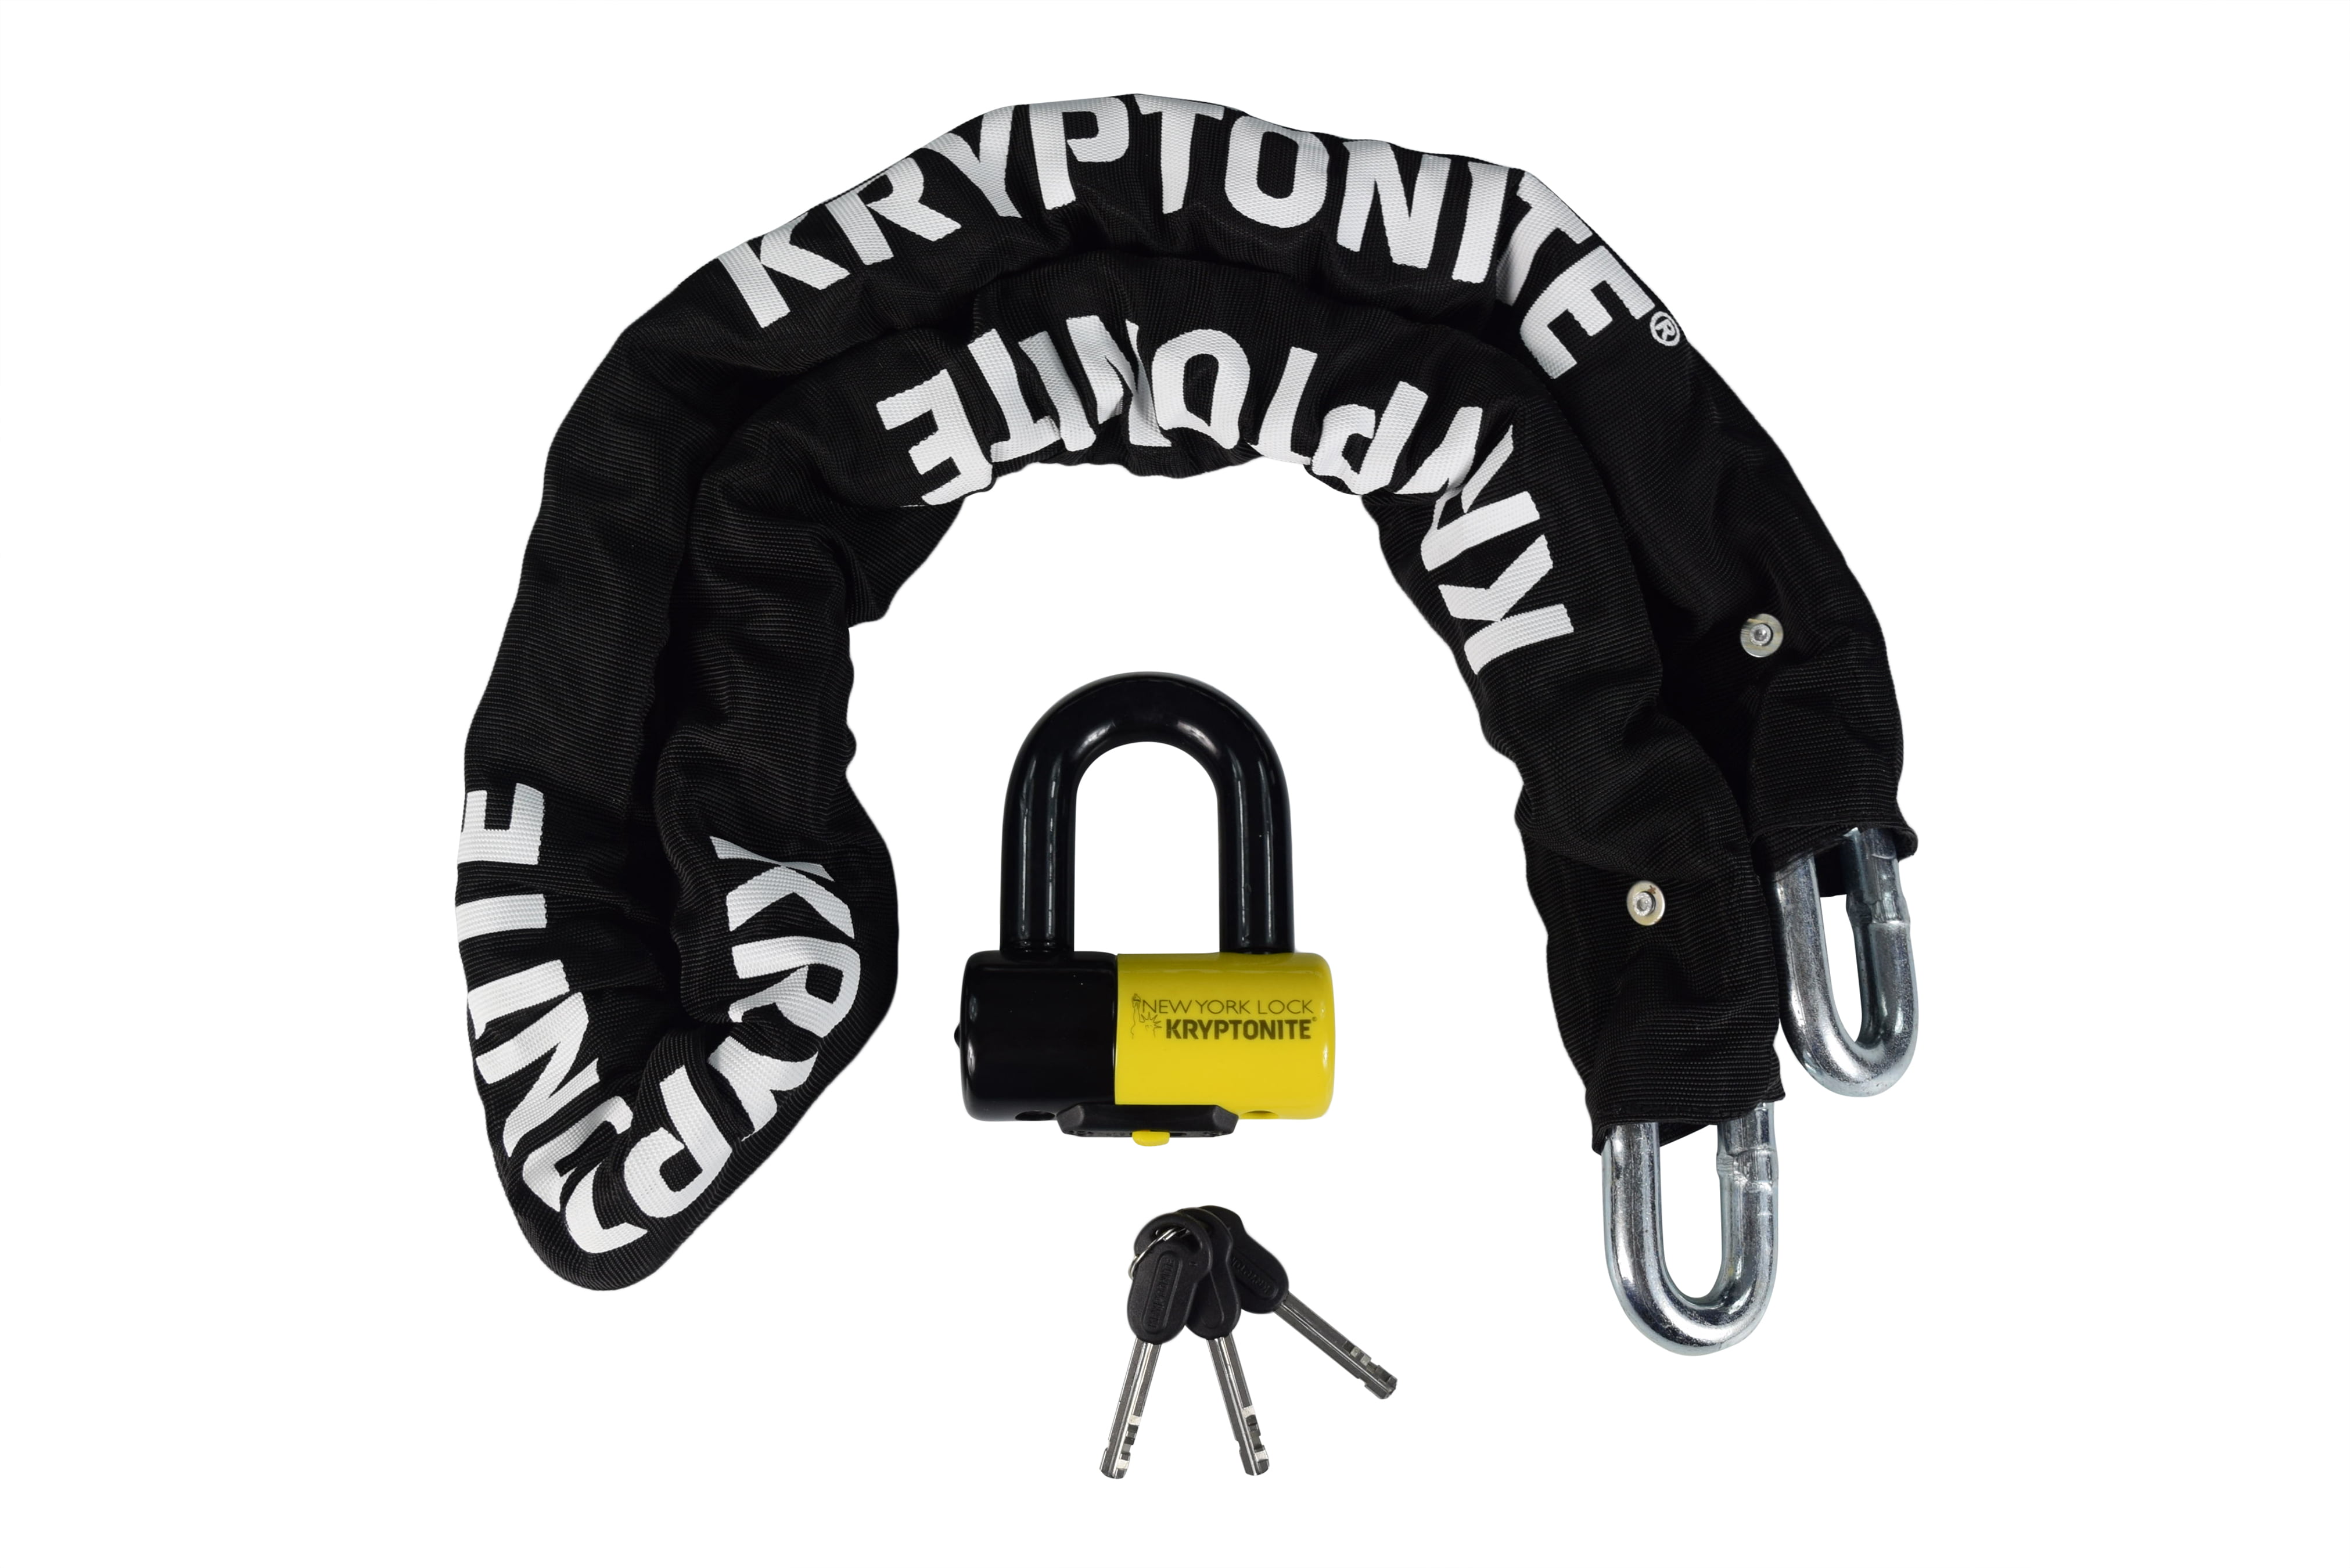 Kryptonite New York Legend 1515 Chain with New York Padlock 30 Inches Long When Locked 